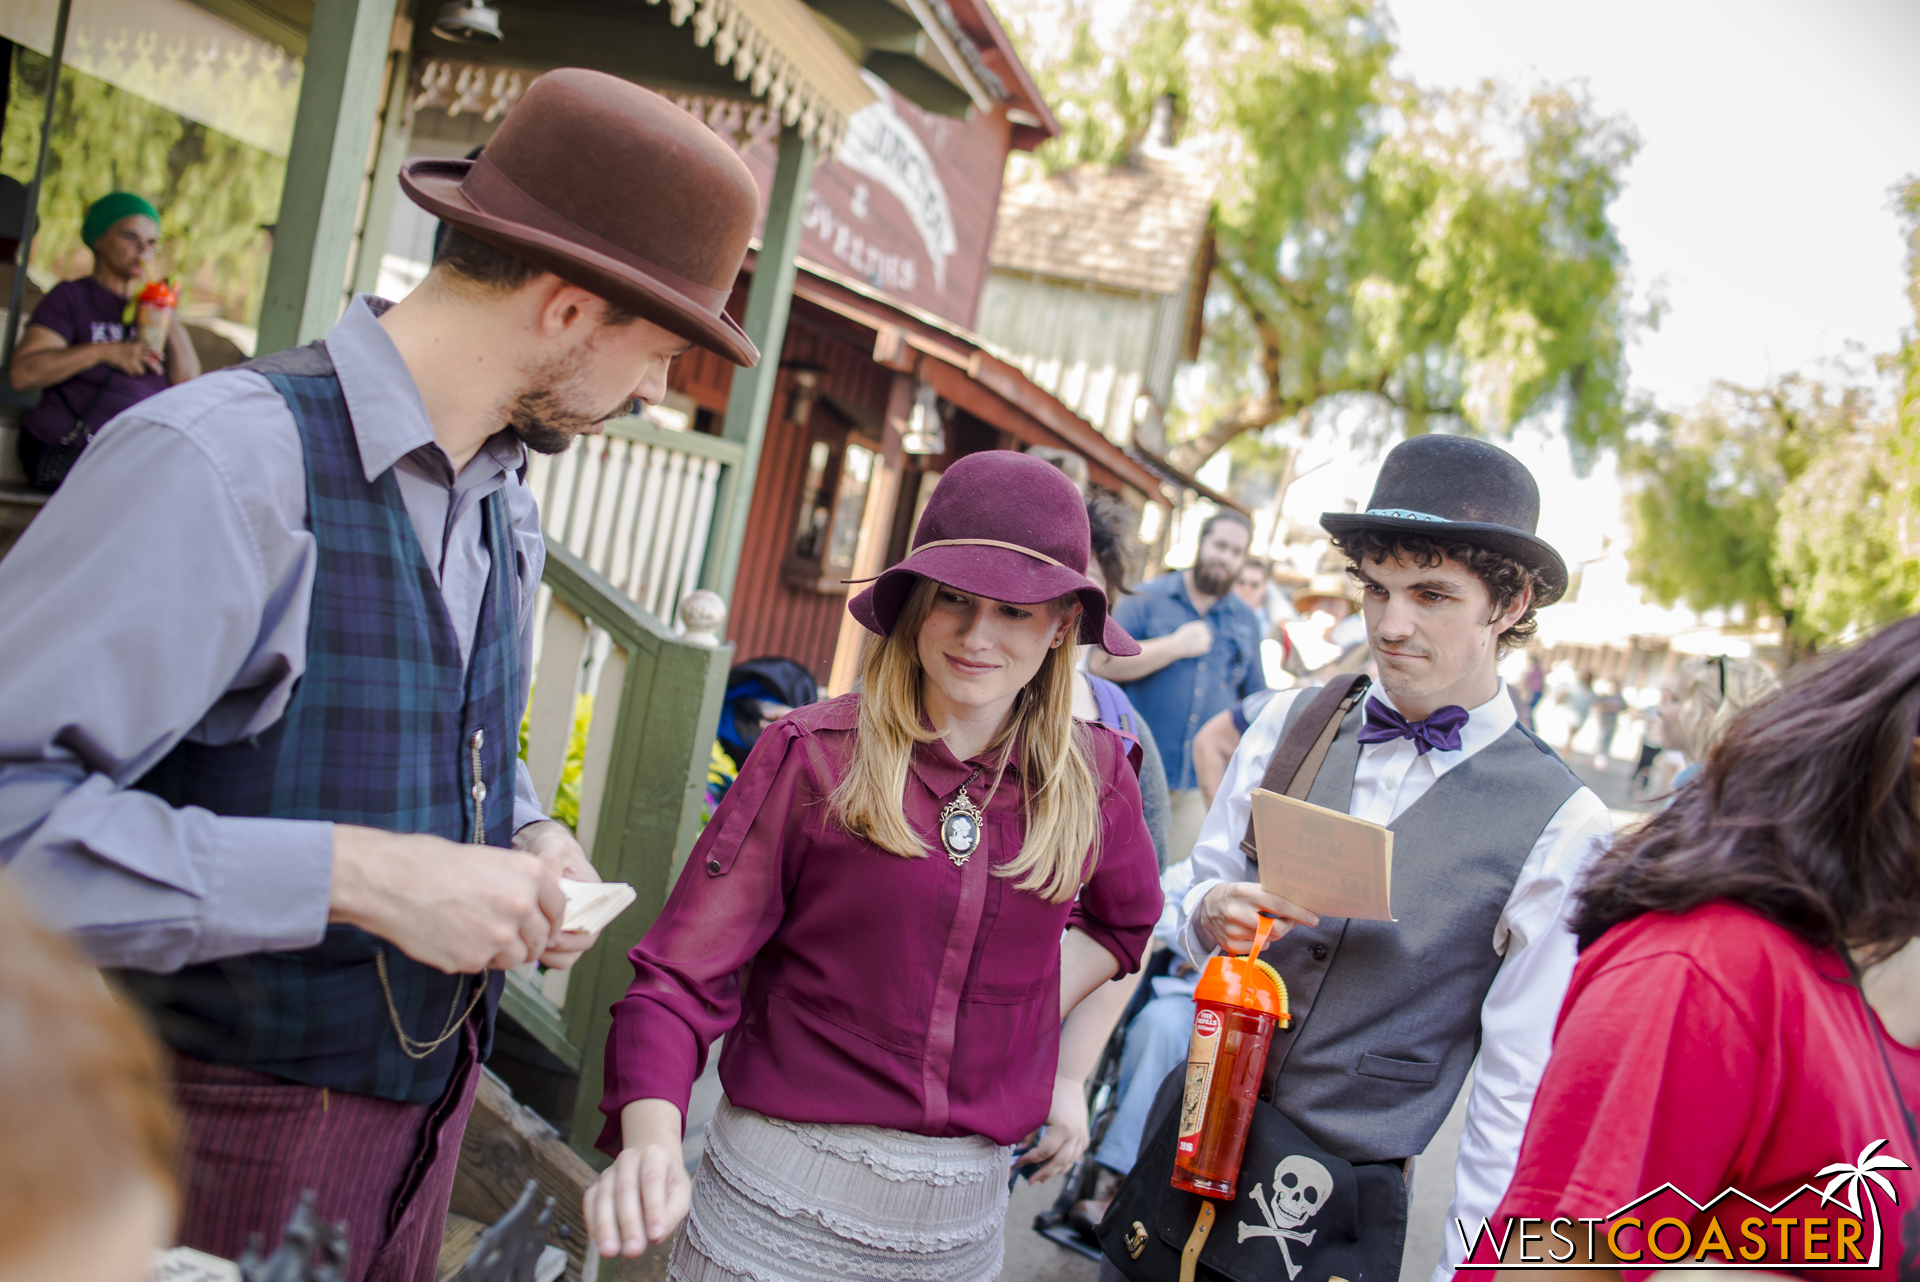  Town clerk Kenny Storm looks on as more guests cast their vote.&nbsp; Ghost Town Alive! has been such a hit that many season passholders return to take part in the story repeatedly, and some even dress up to enhance the role playing. 